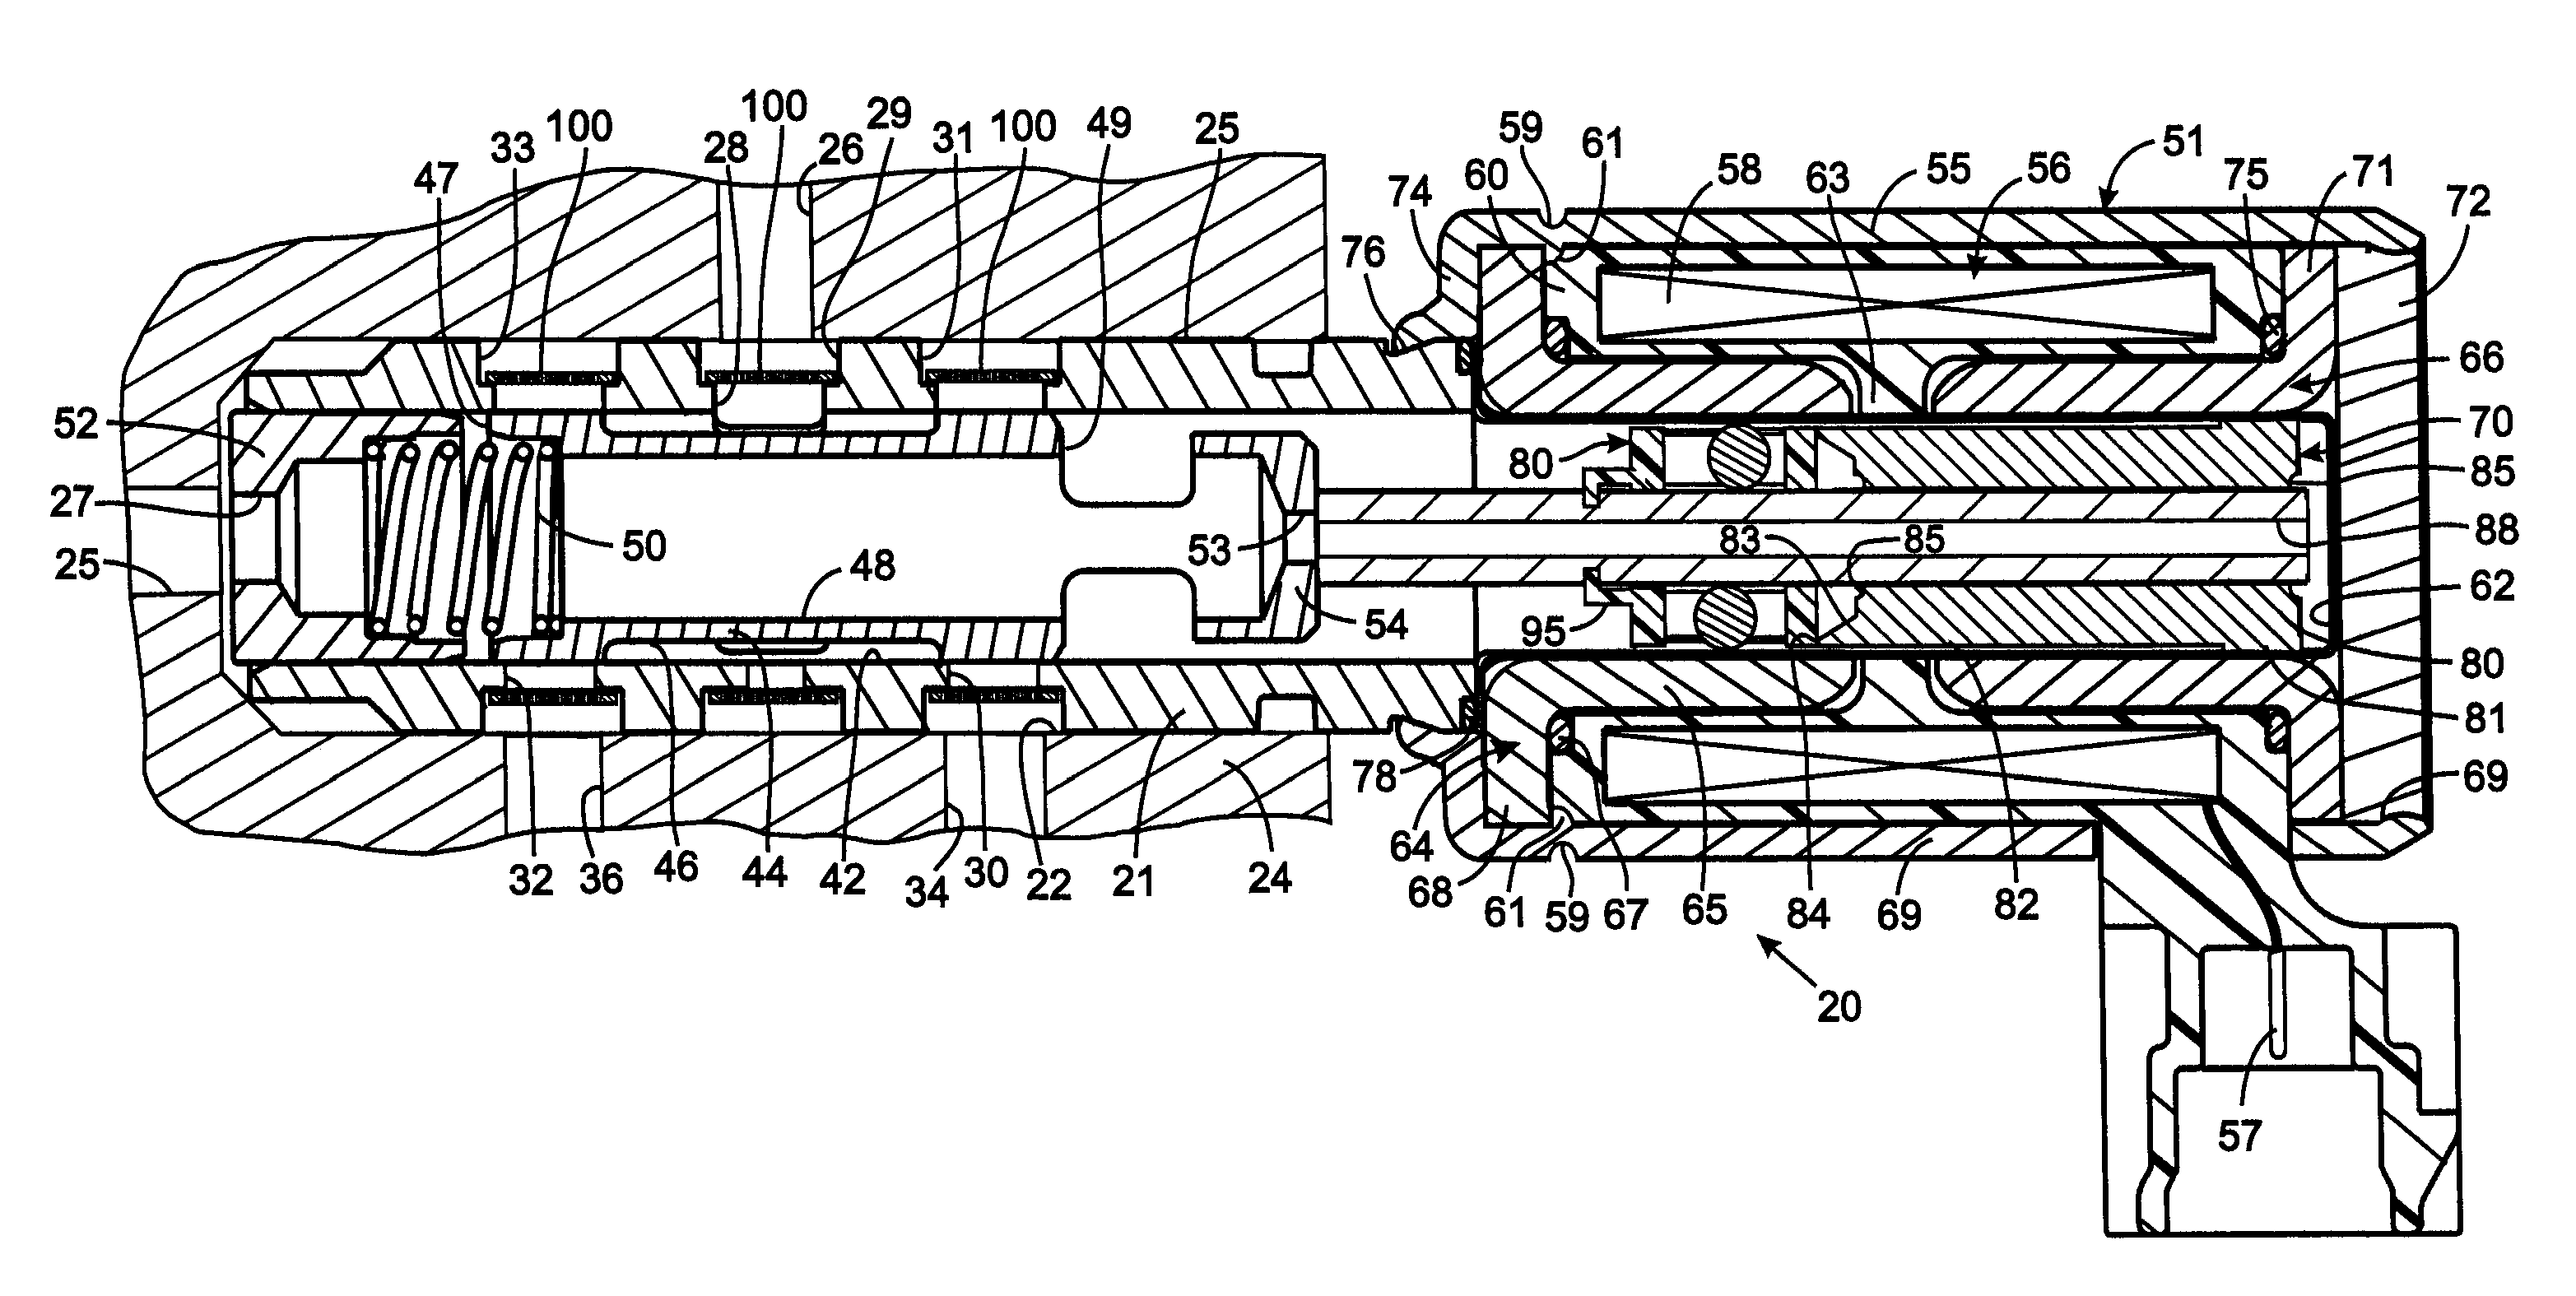 Electrohydraulic valve having a solenoid actuator plunger with an armature and a bearing